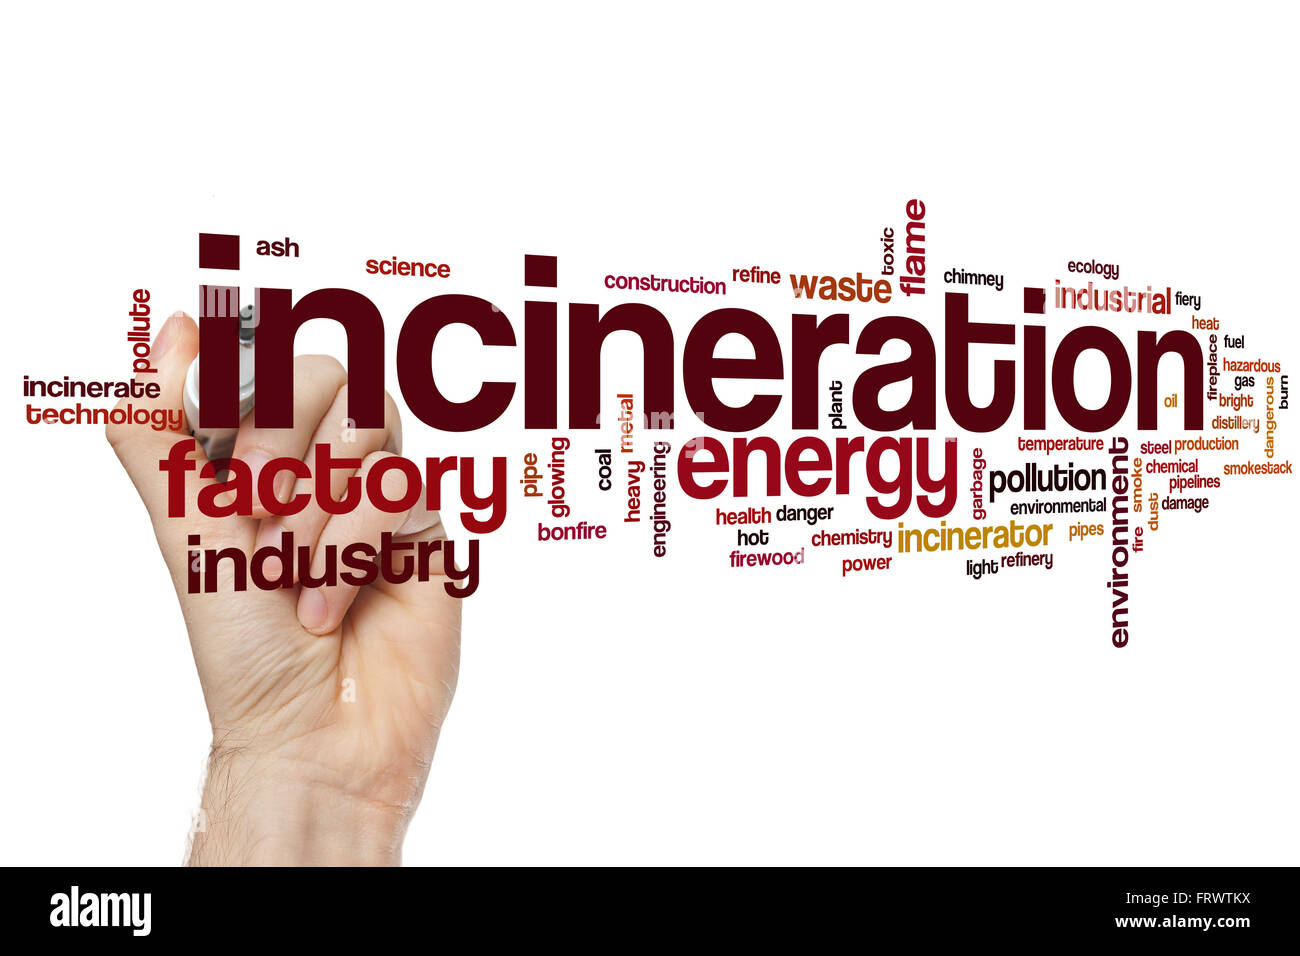 Incineration word cloud concept with waste smoke related tags Stock Photo